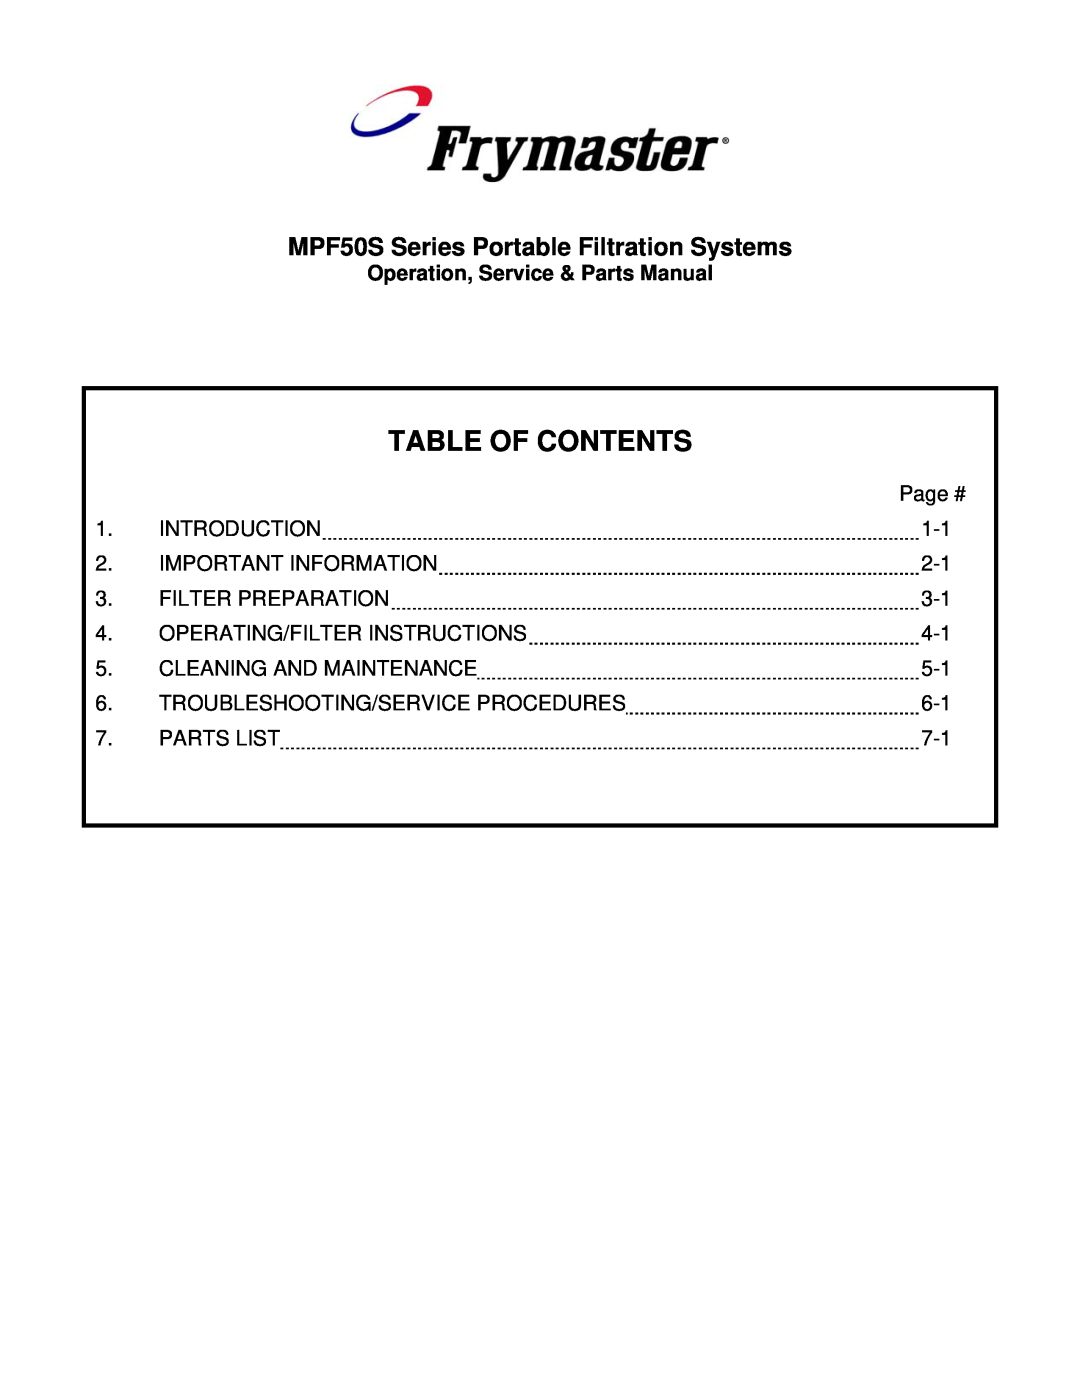 Frymaster manual Table Of Contents, MPF50S Series Portable Filtration Systems, Operation, Service & Parts Manual 